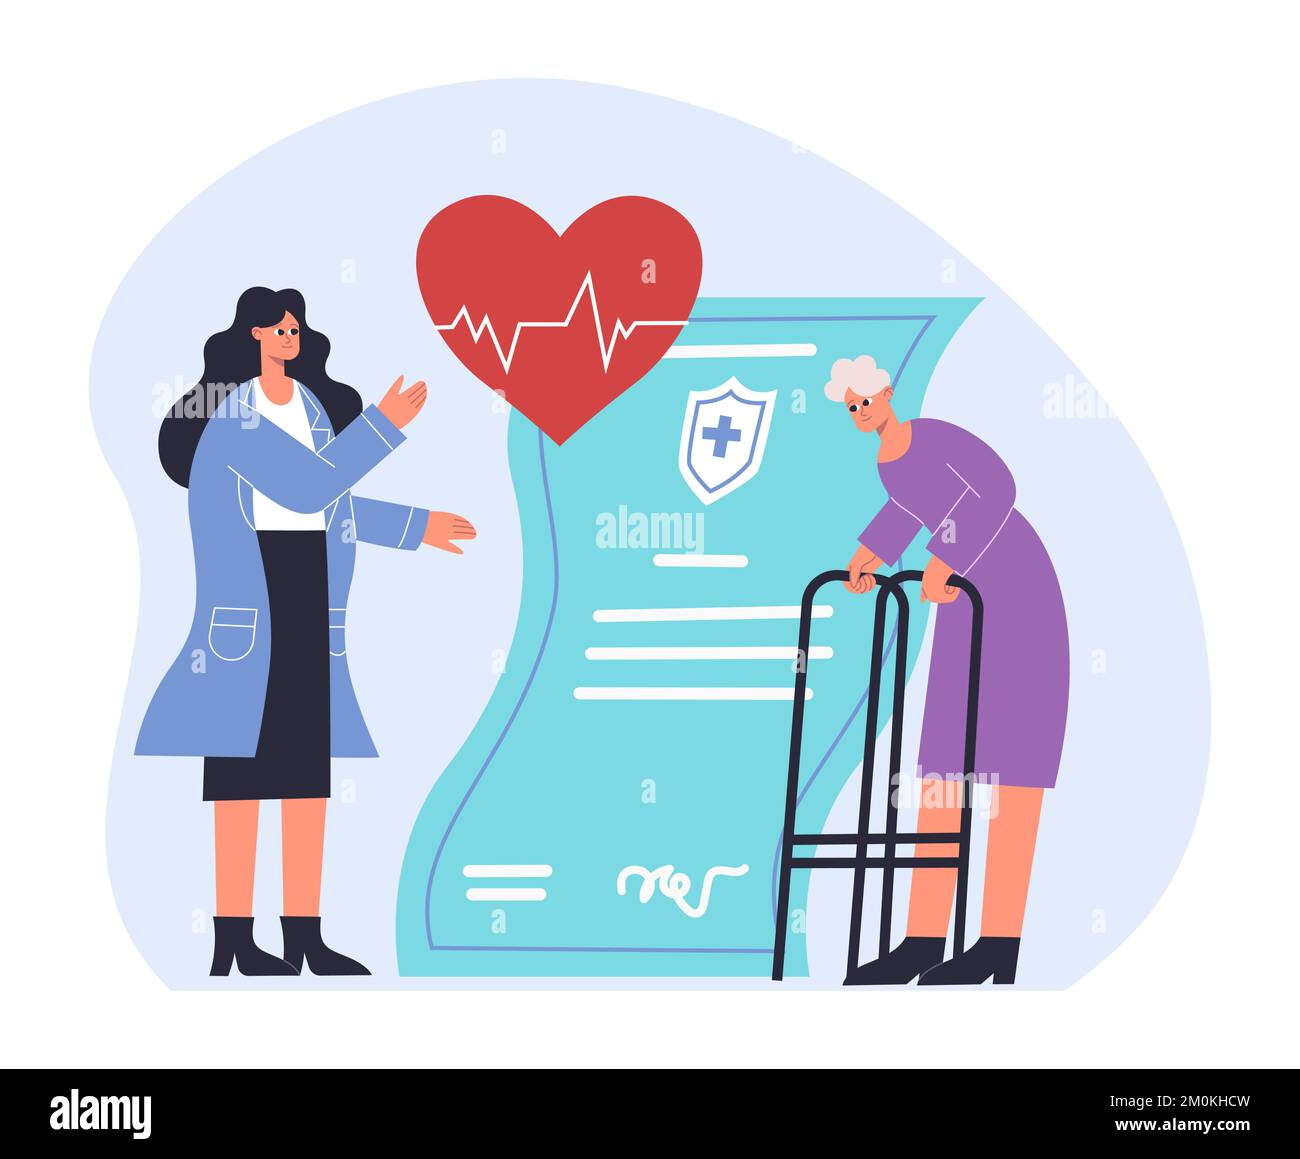 Risk insurance protecting health for elderly people. Security and safety of life from damage or illnesses Stock Vector